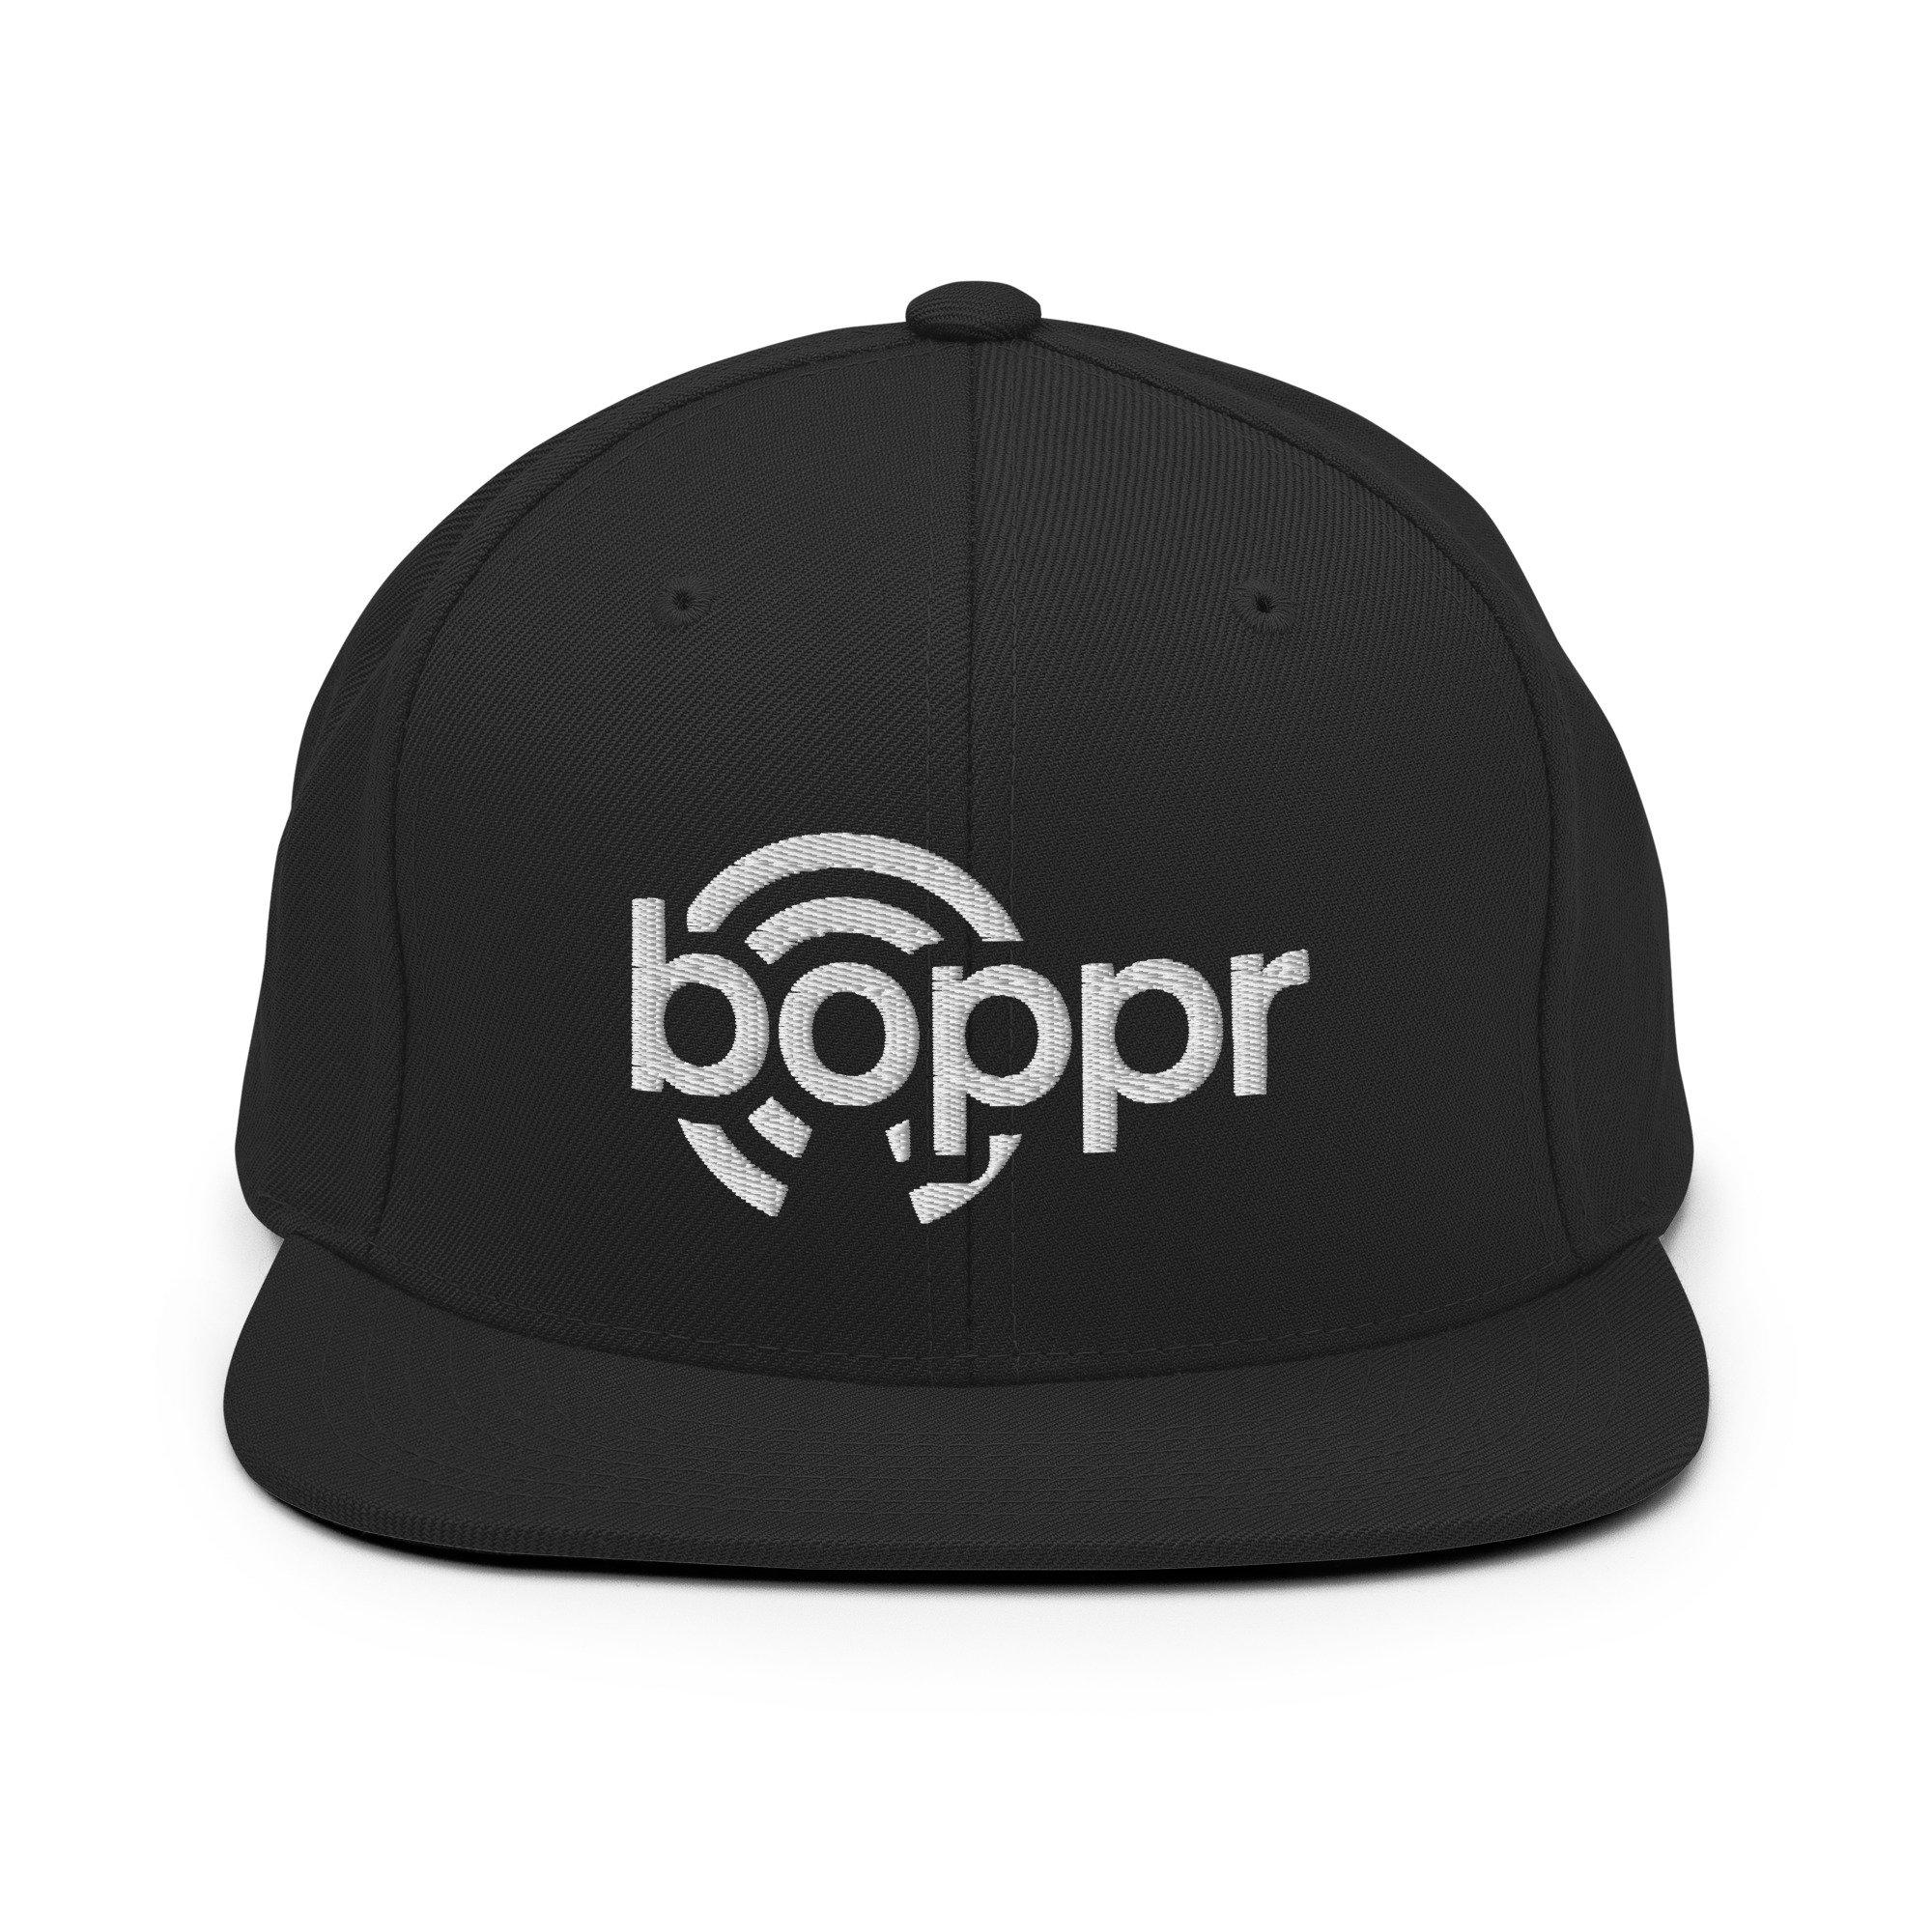 Product: Boppr® Snapback Hat - FocalFuse